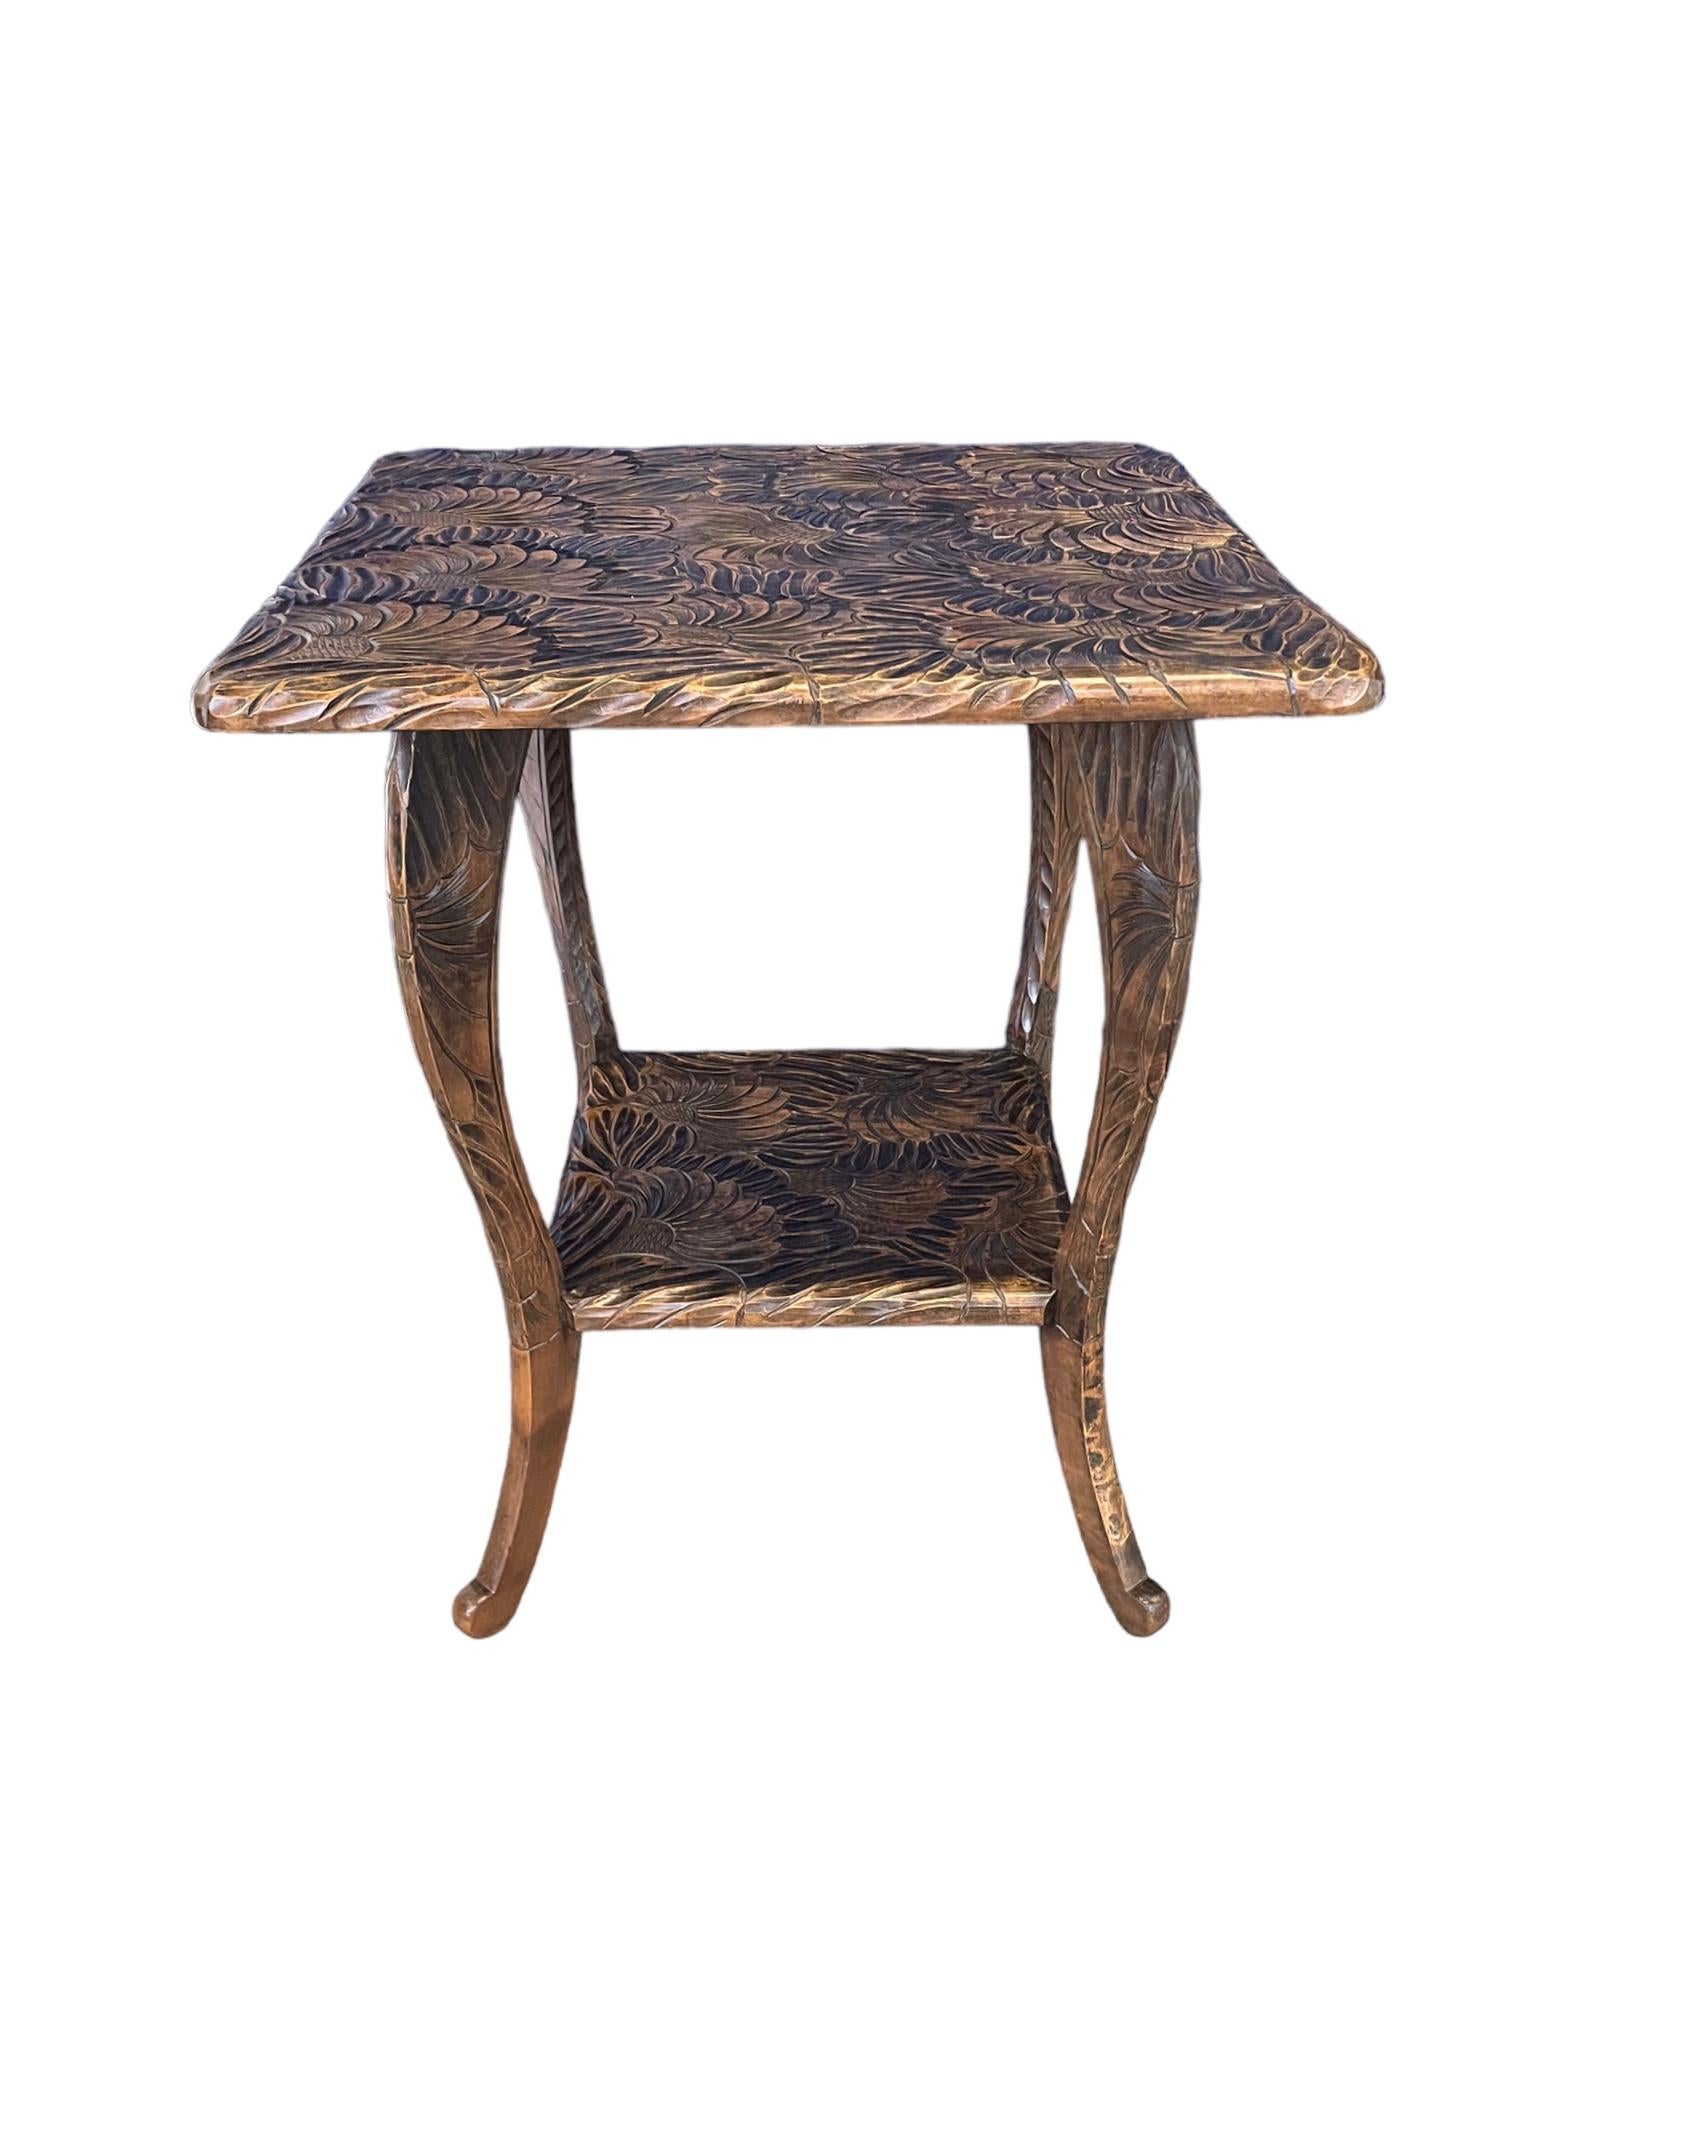 Carved Arts & Crafts Japanese Table retailed by Liberty and Co. For Sale